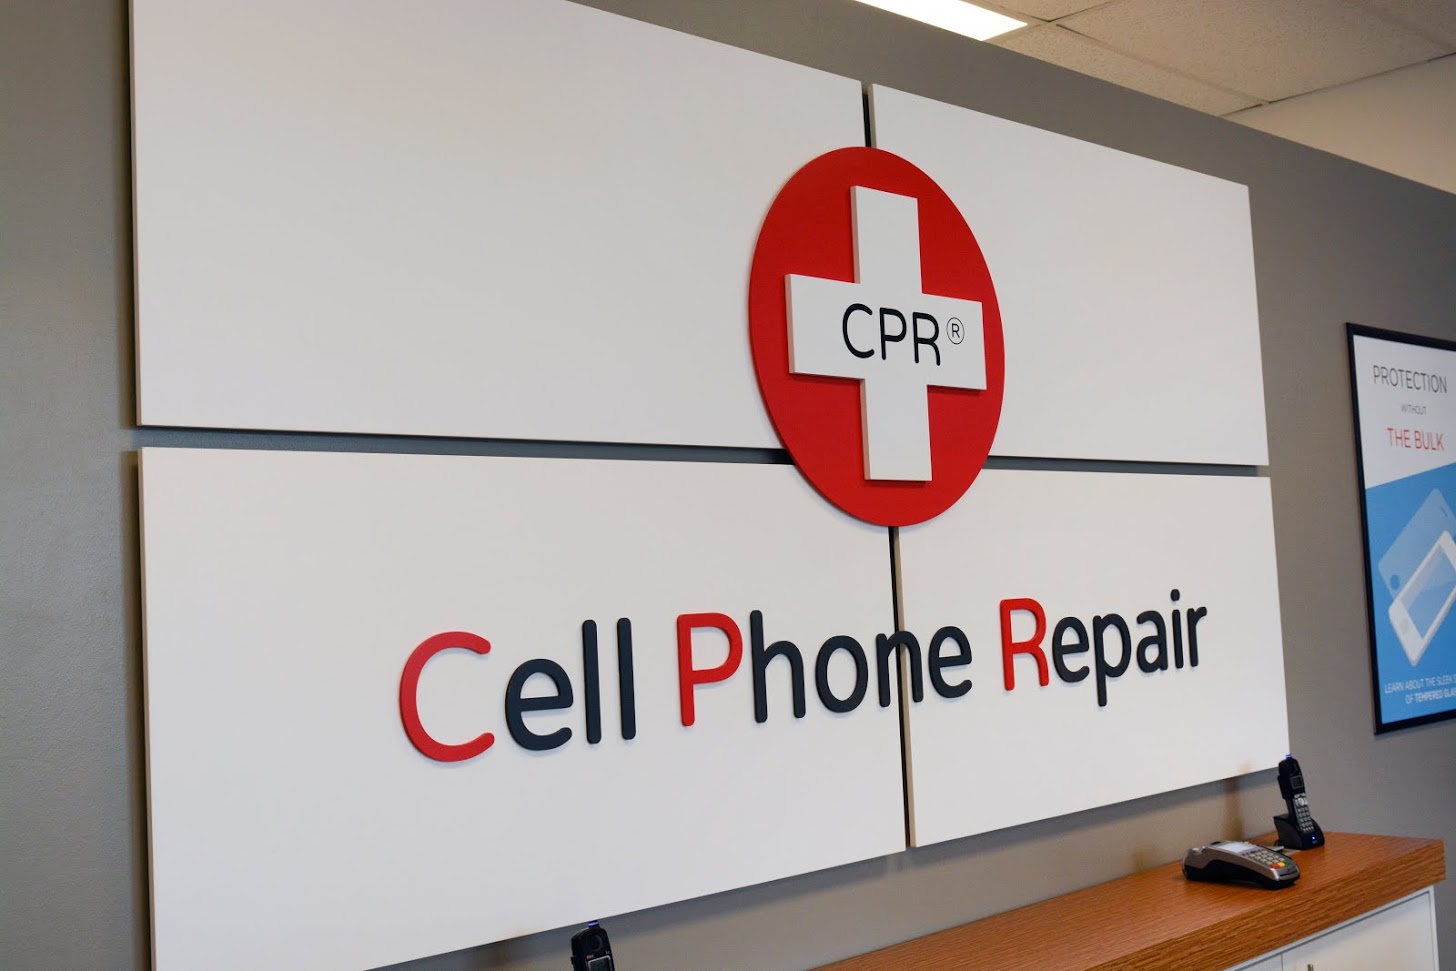 CPR Cell Phone Repair, Friday, June 28, 2019, Press release picture